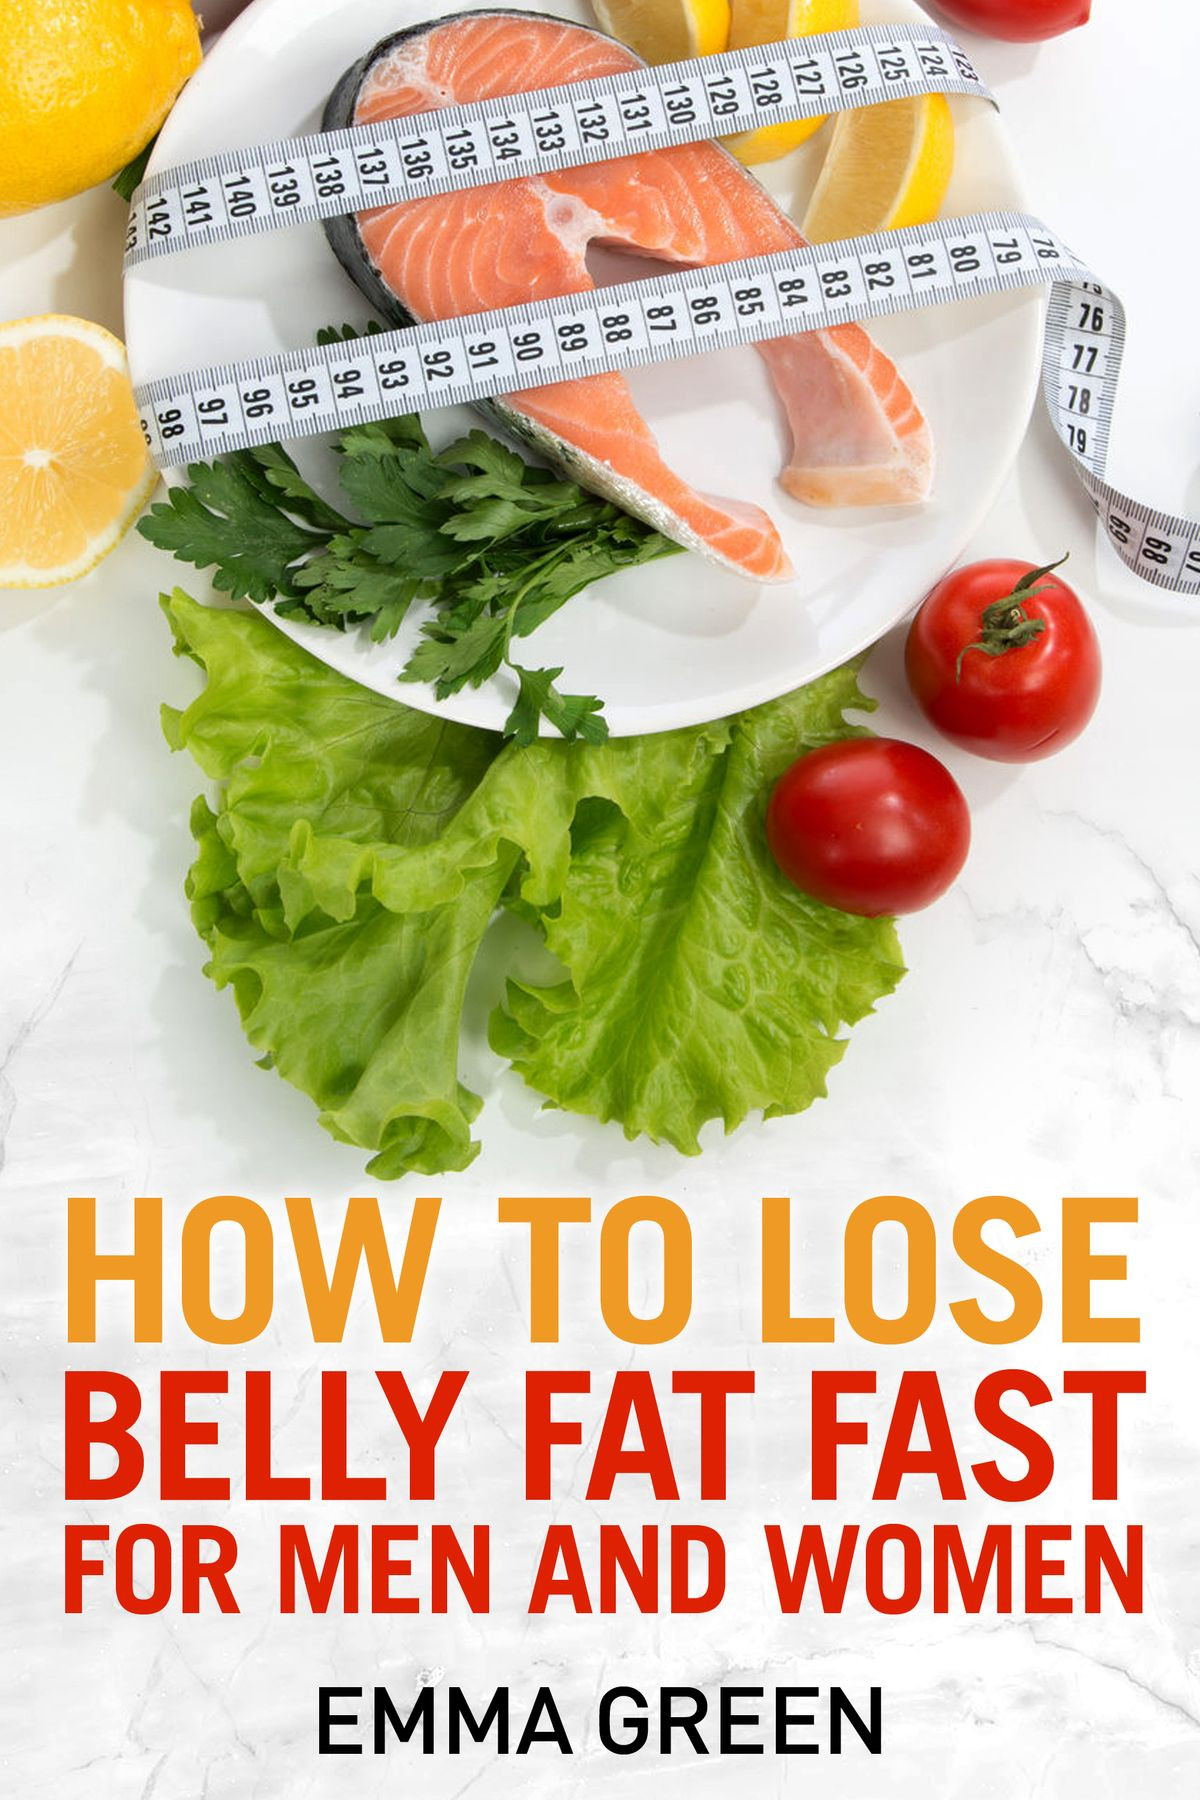 How To Lose Belly Fat Fast Woman
 How to Lose Belly Fat Fast For Men and Woman eBook by Emma